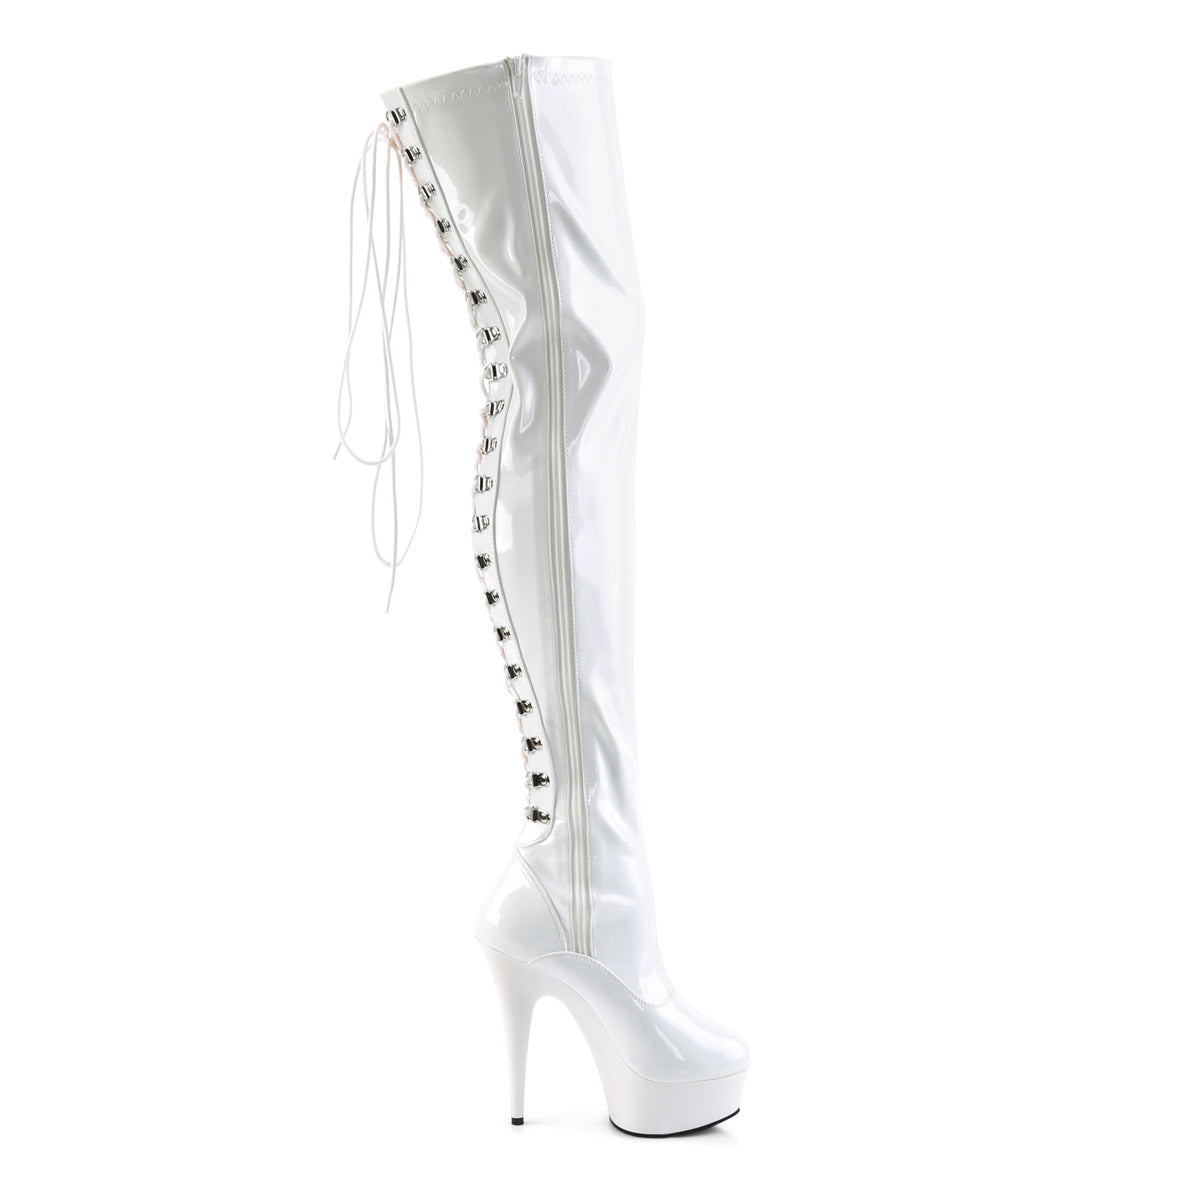 Sexy Back Lace Up Thigh High Platform Stiletto Heel Boots Shoes Pleaser Pleaser DELIGHT/3063